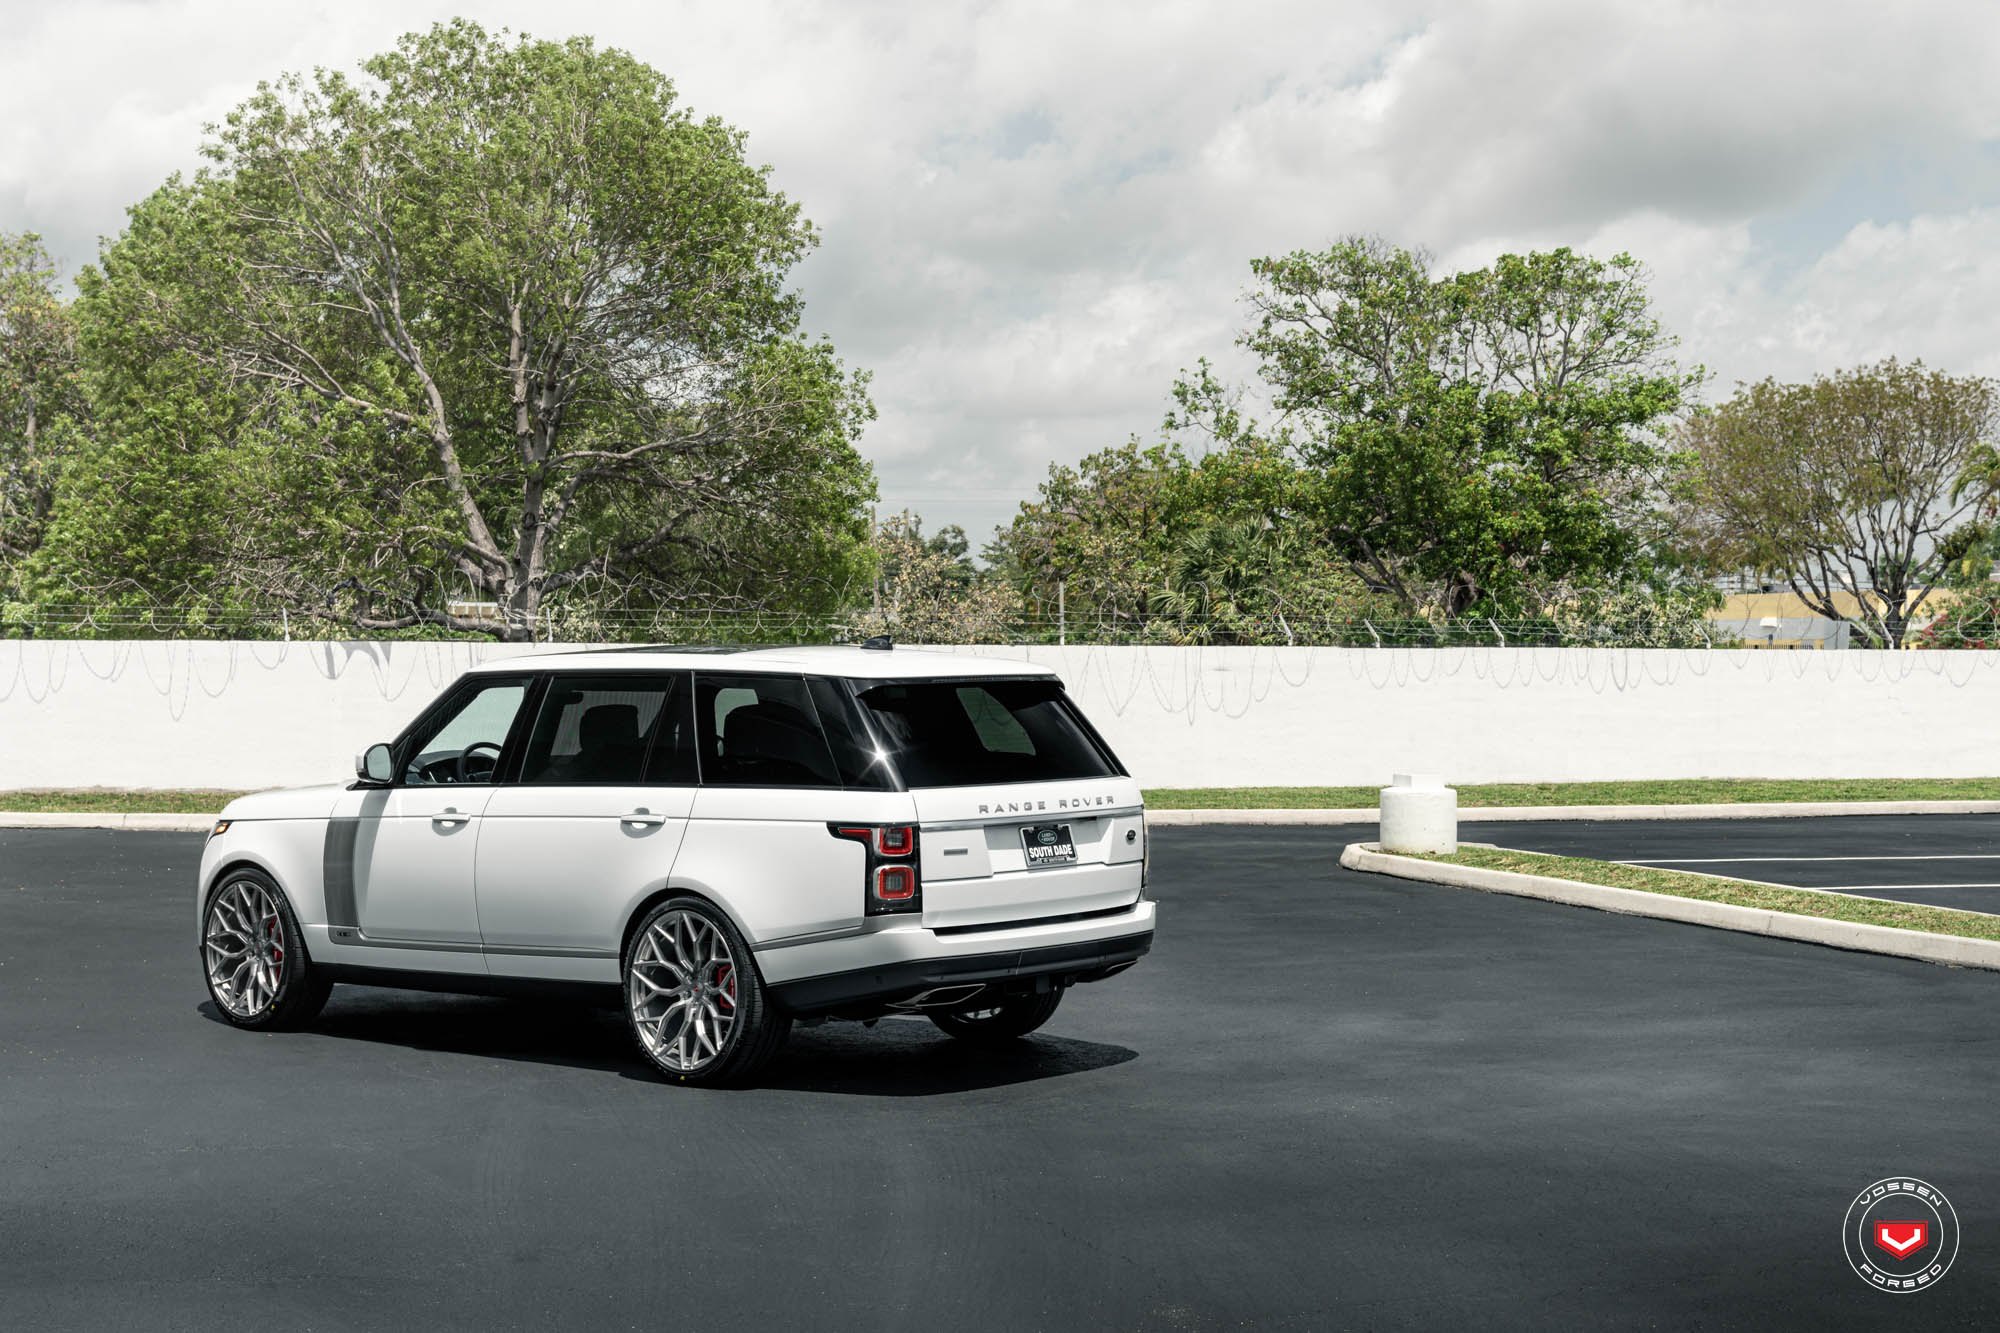 White Range Rover with Aftermarket Red LED Taillights - Photo by Vossen